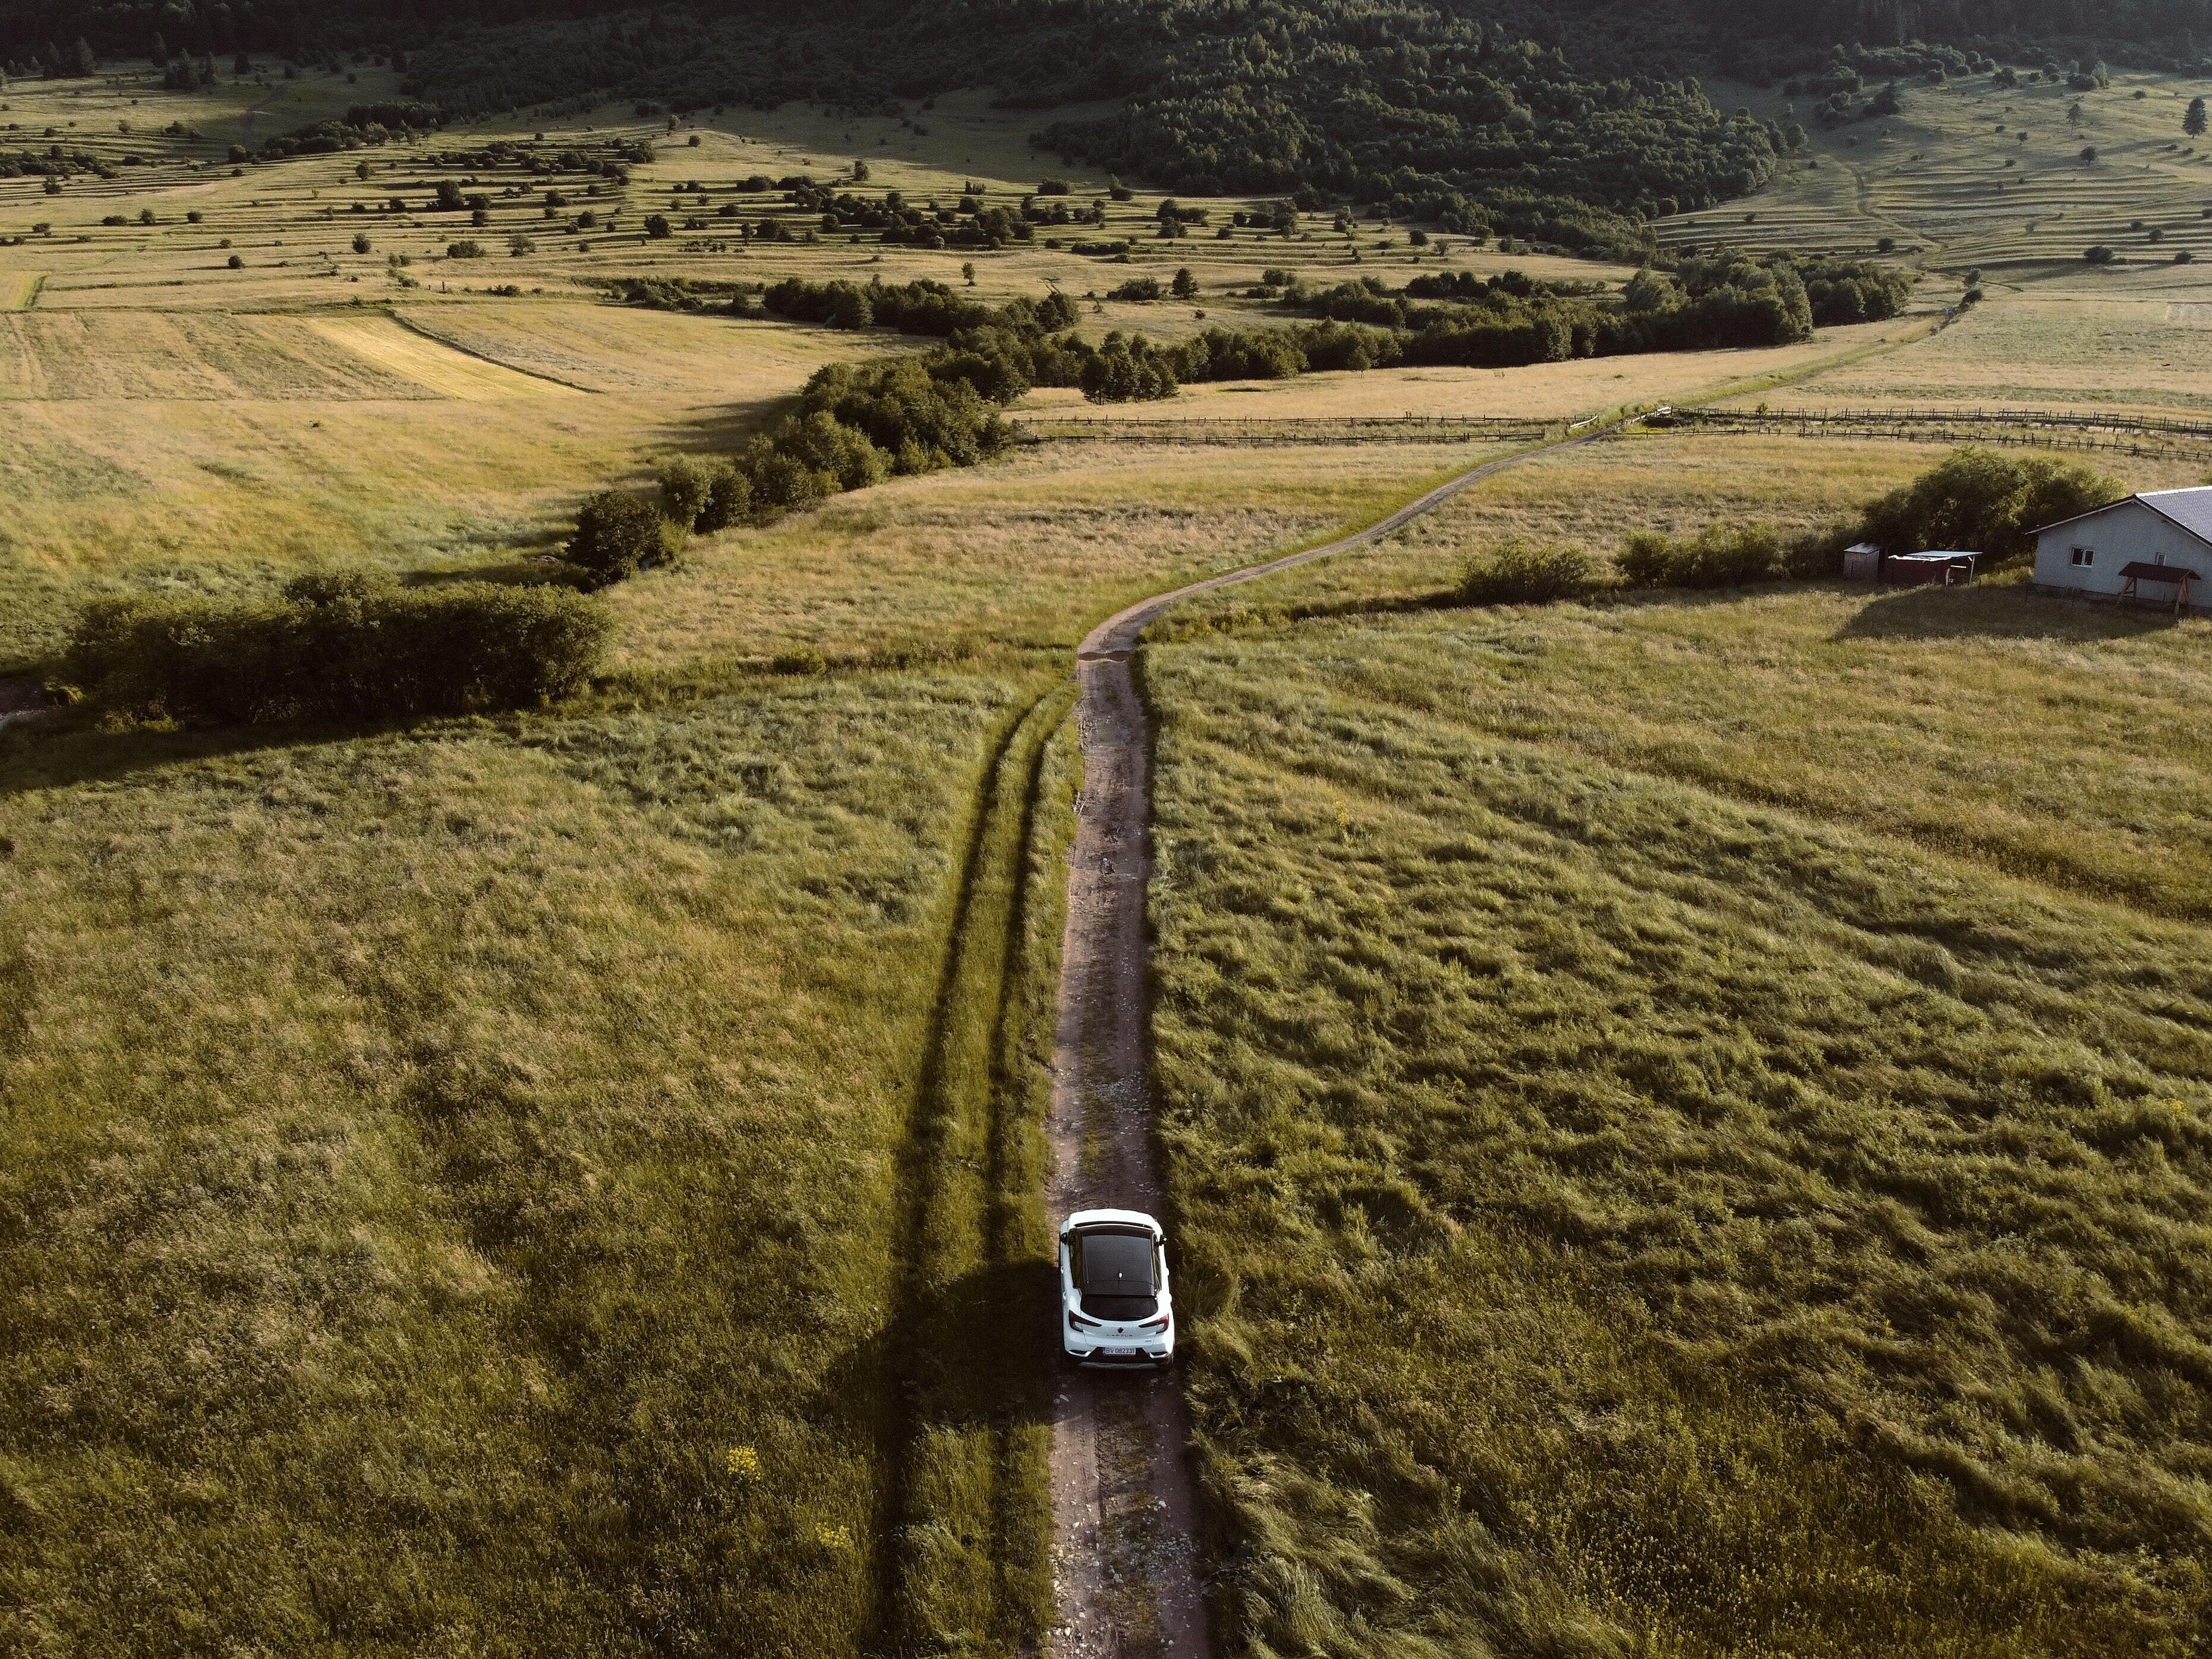 An areal shot of an electric car driving on an off-road path in the middle of a lush countryside.